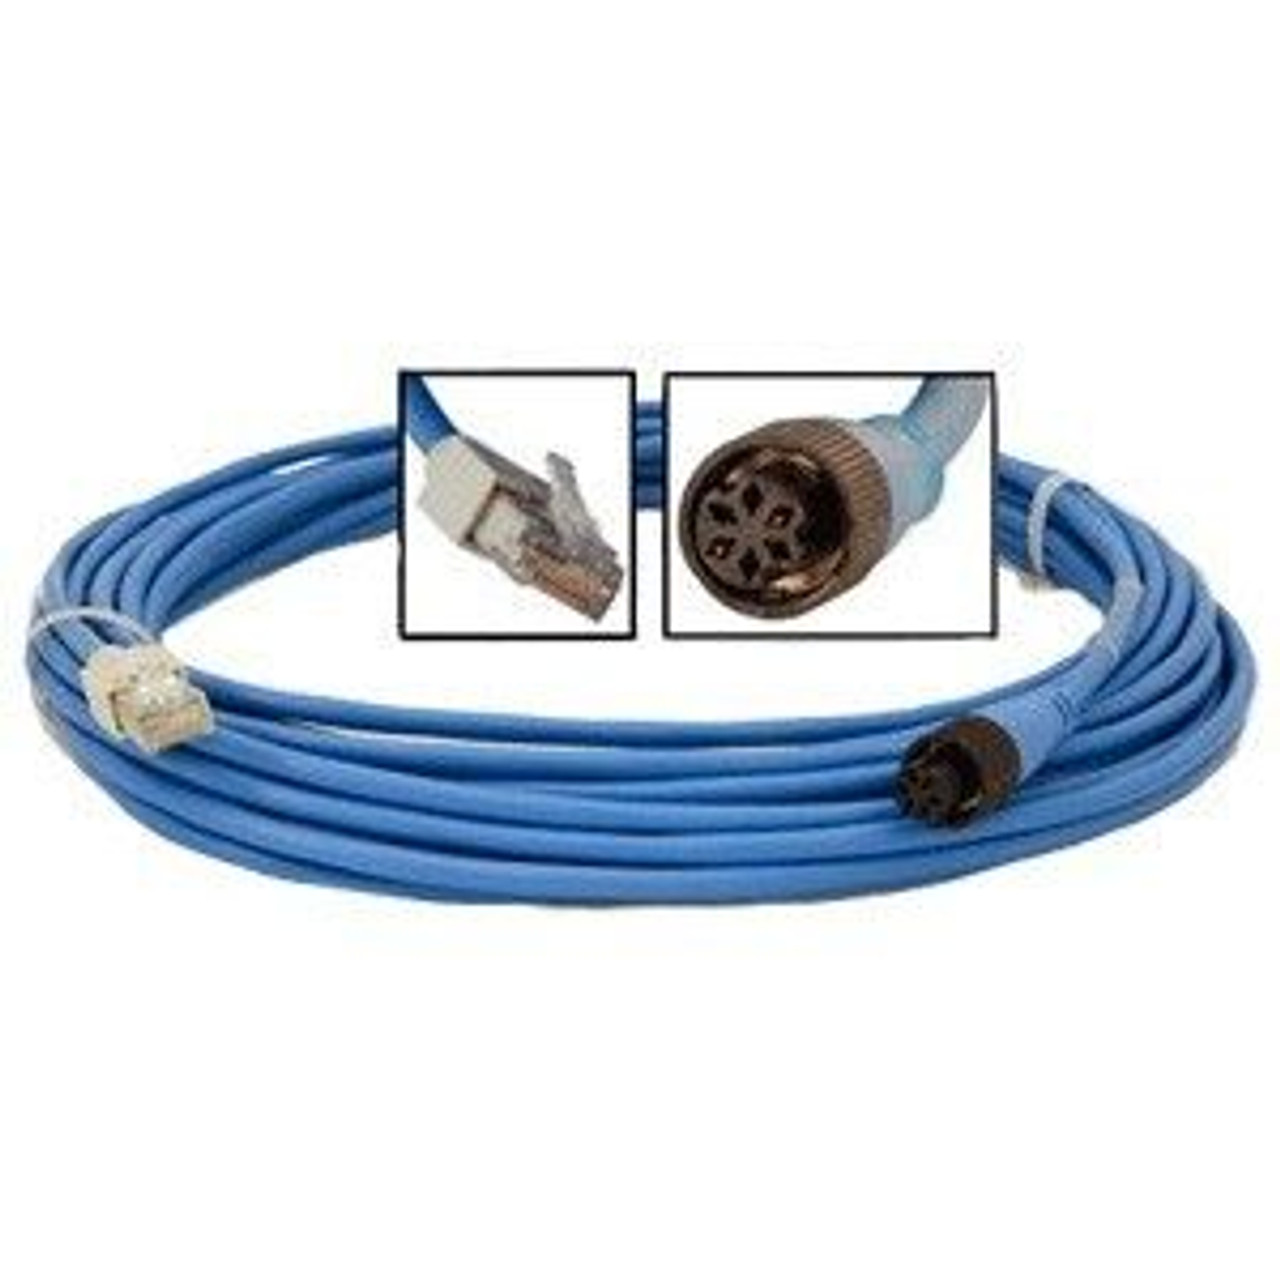 Furuno 000-159-704 1m Rj45 To Pin Cable Going From Dff1 To Vx2  Trionics